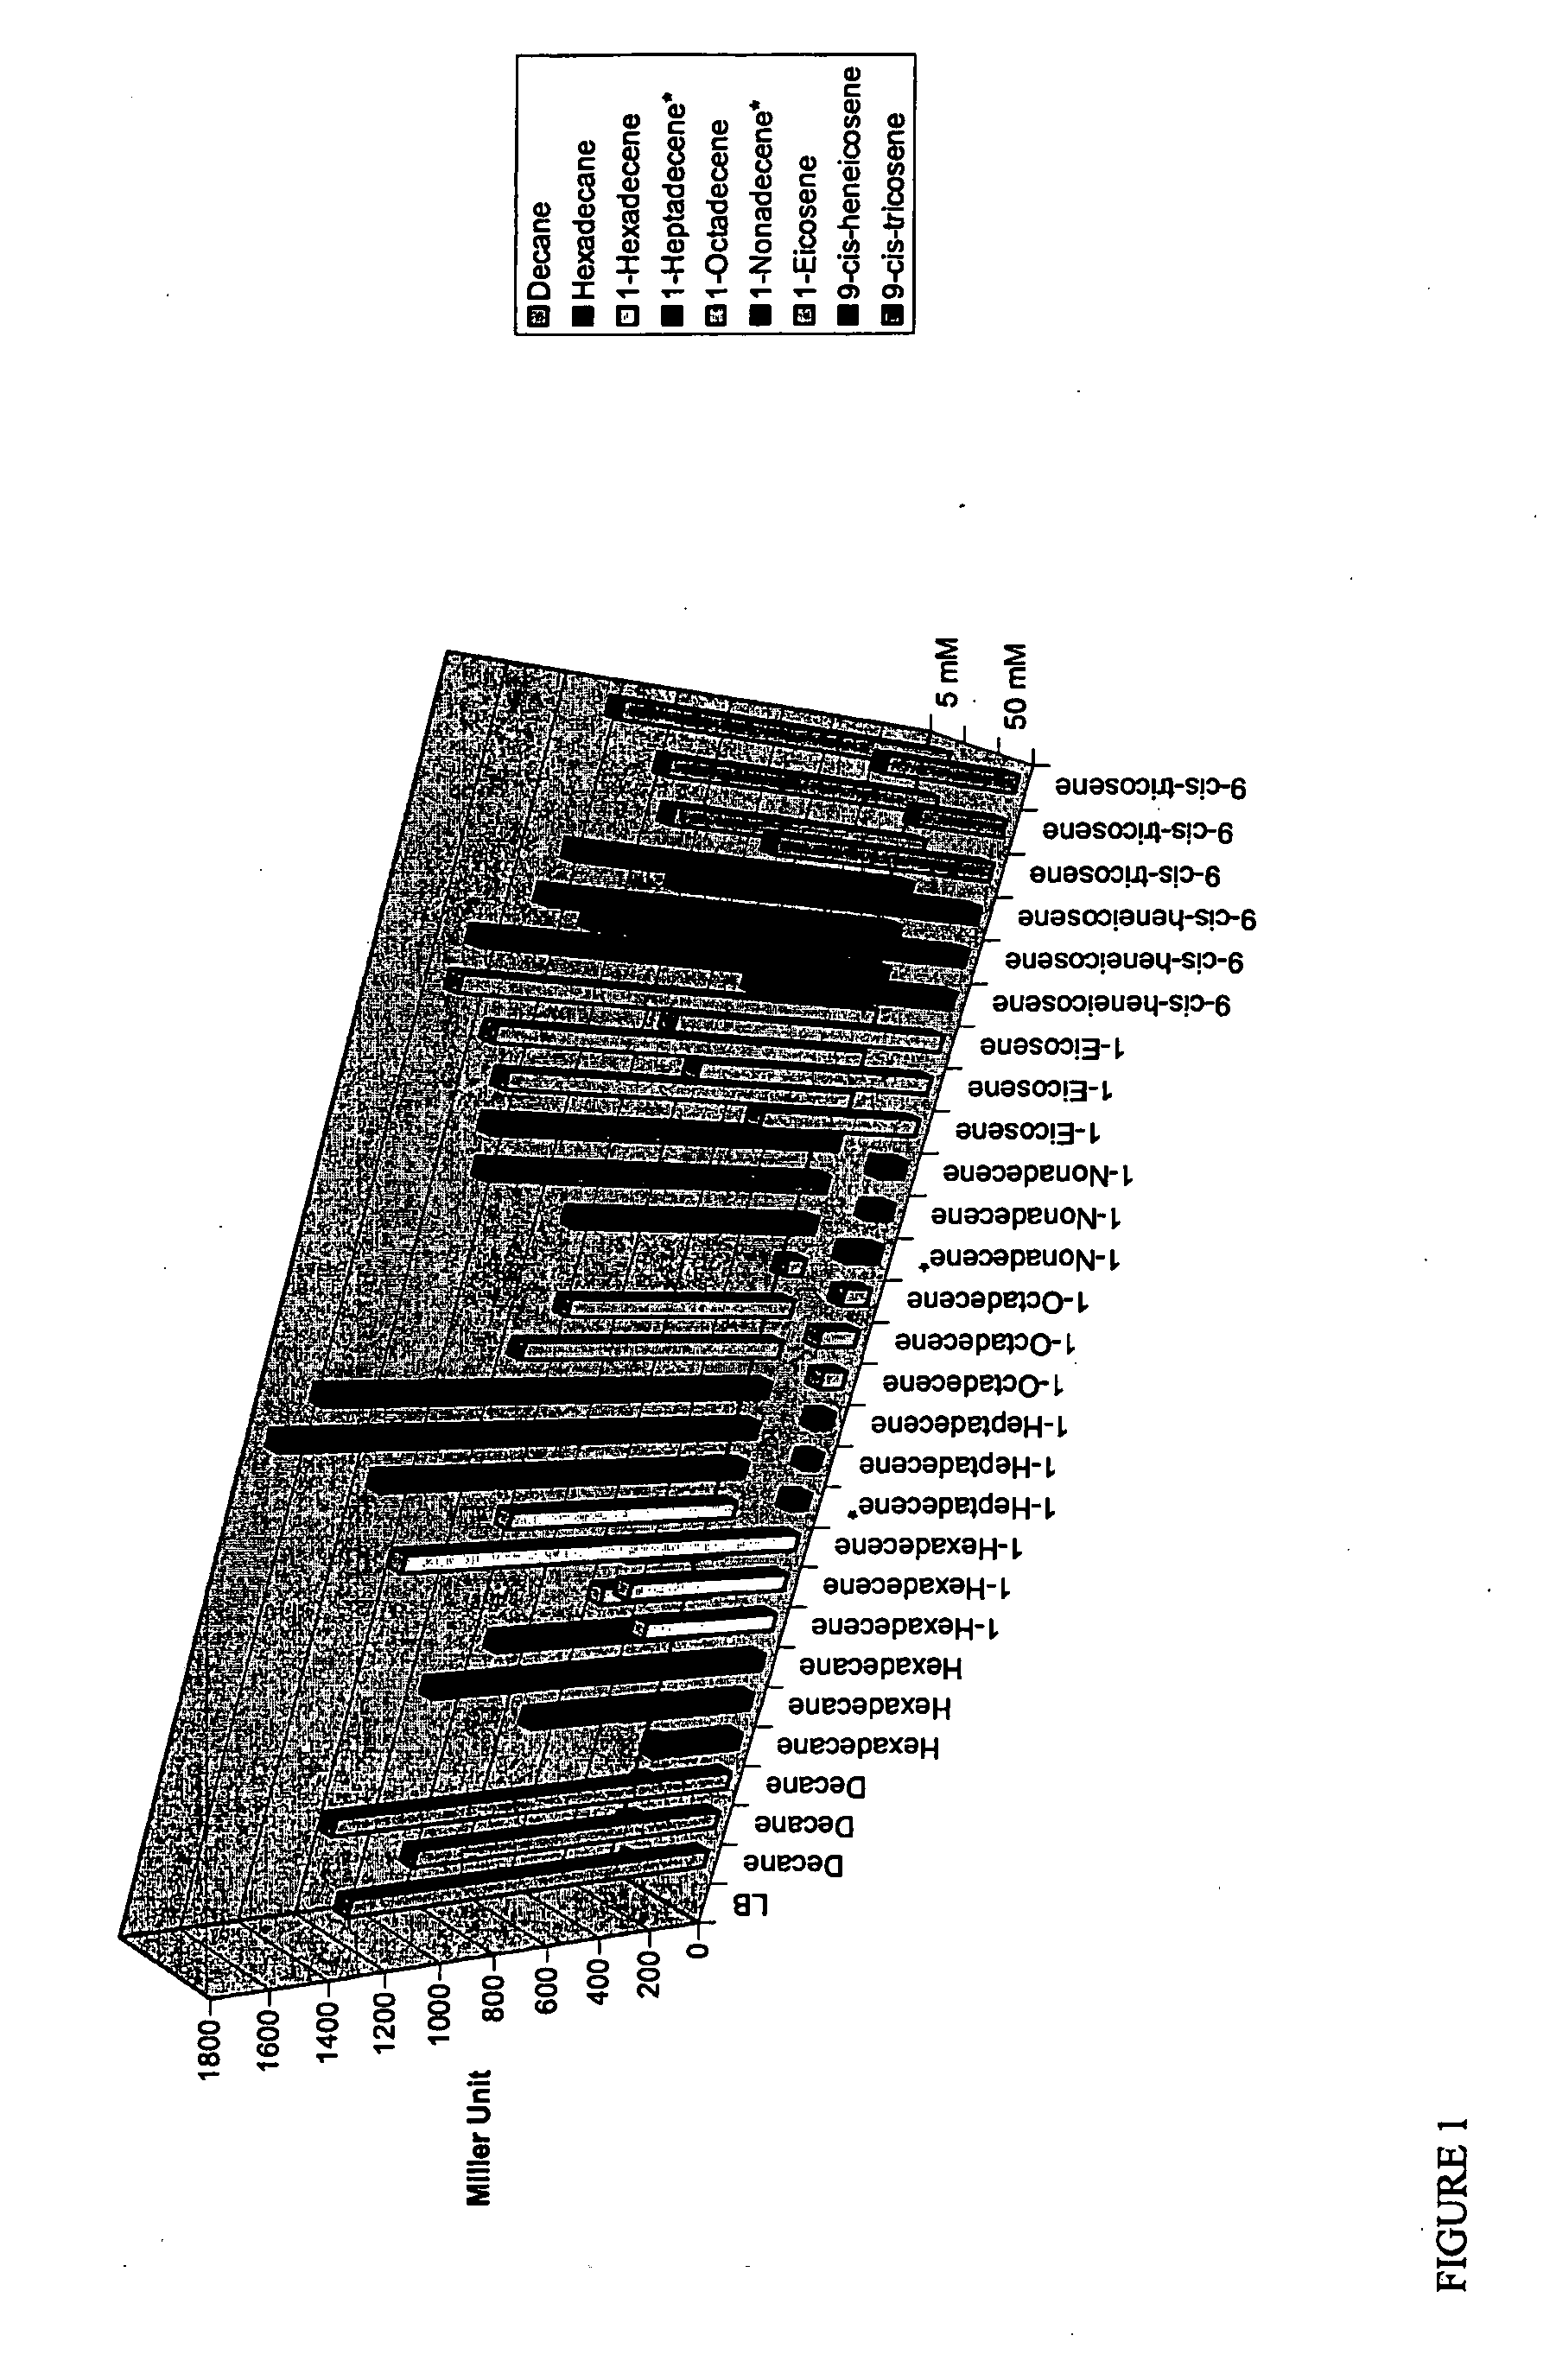 Methods and Compositions for Identification of Hydrocarbon Response, Transport and Biosynthesis Genes